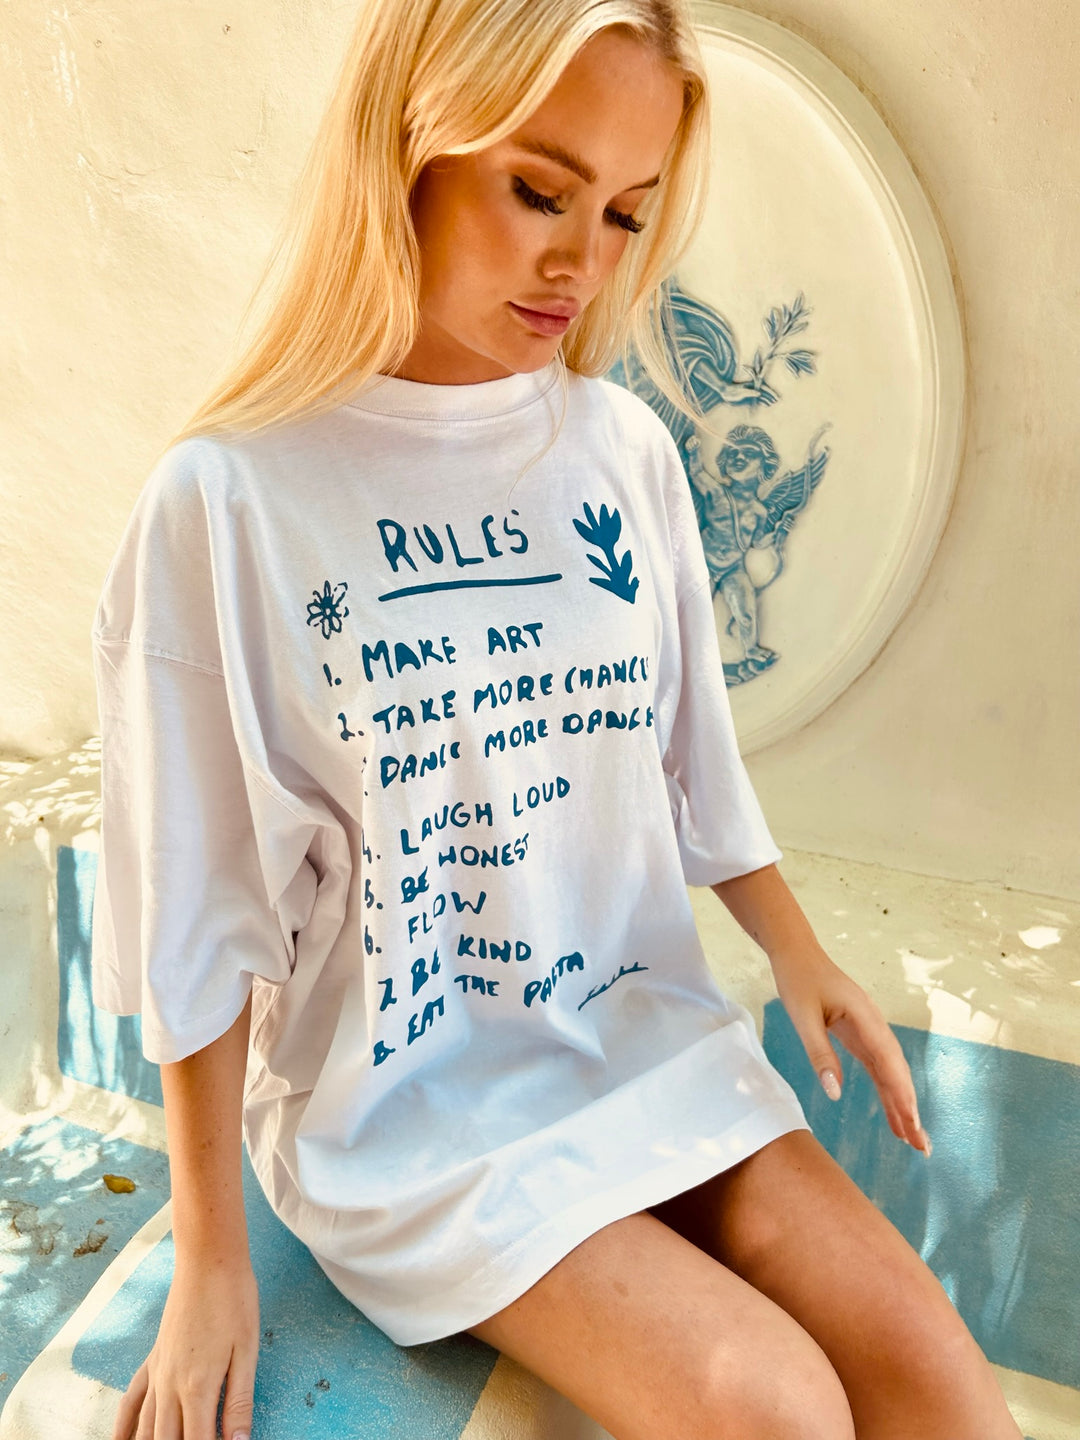 THE VERY OVERSIZED RULES TEE